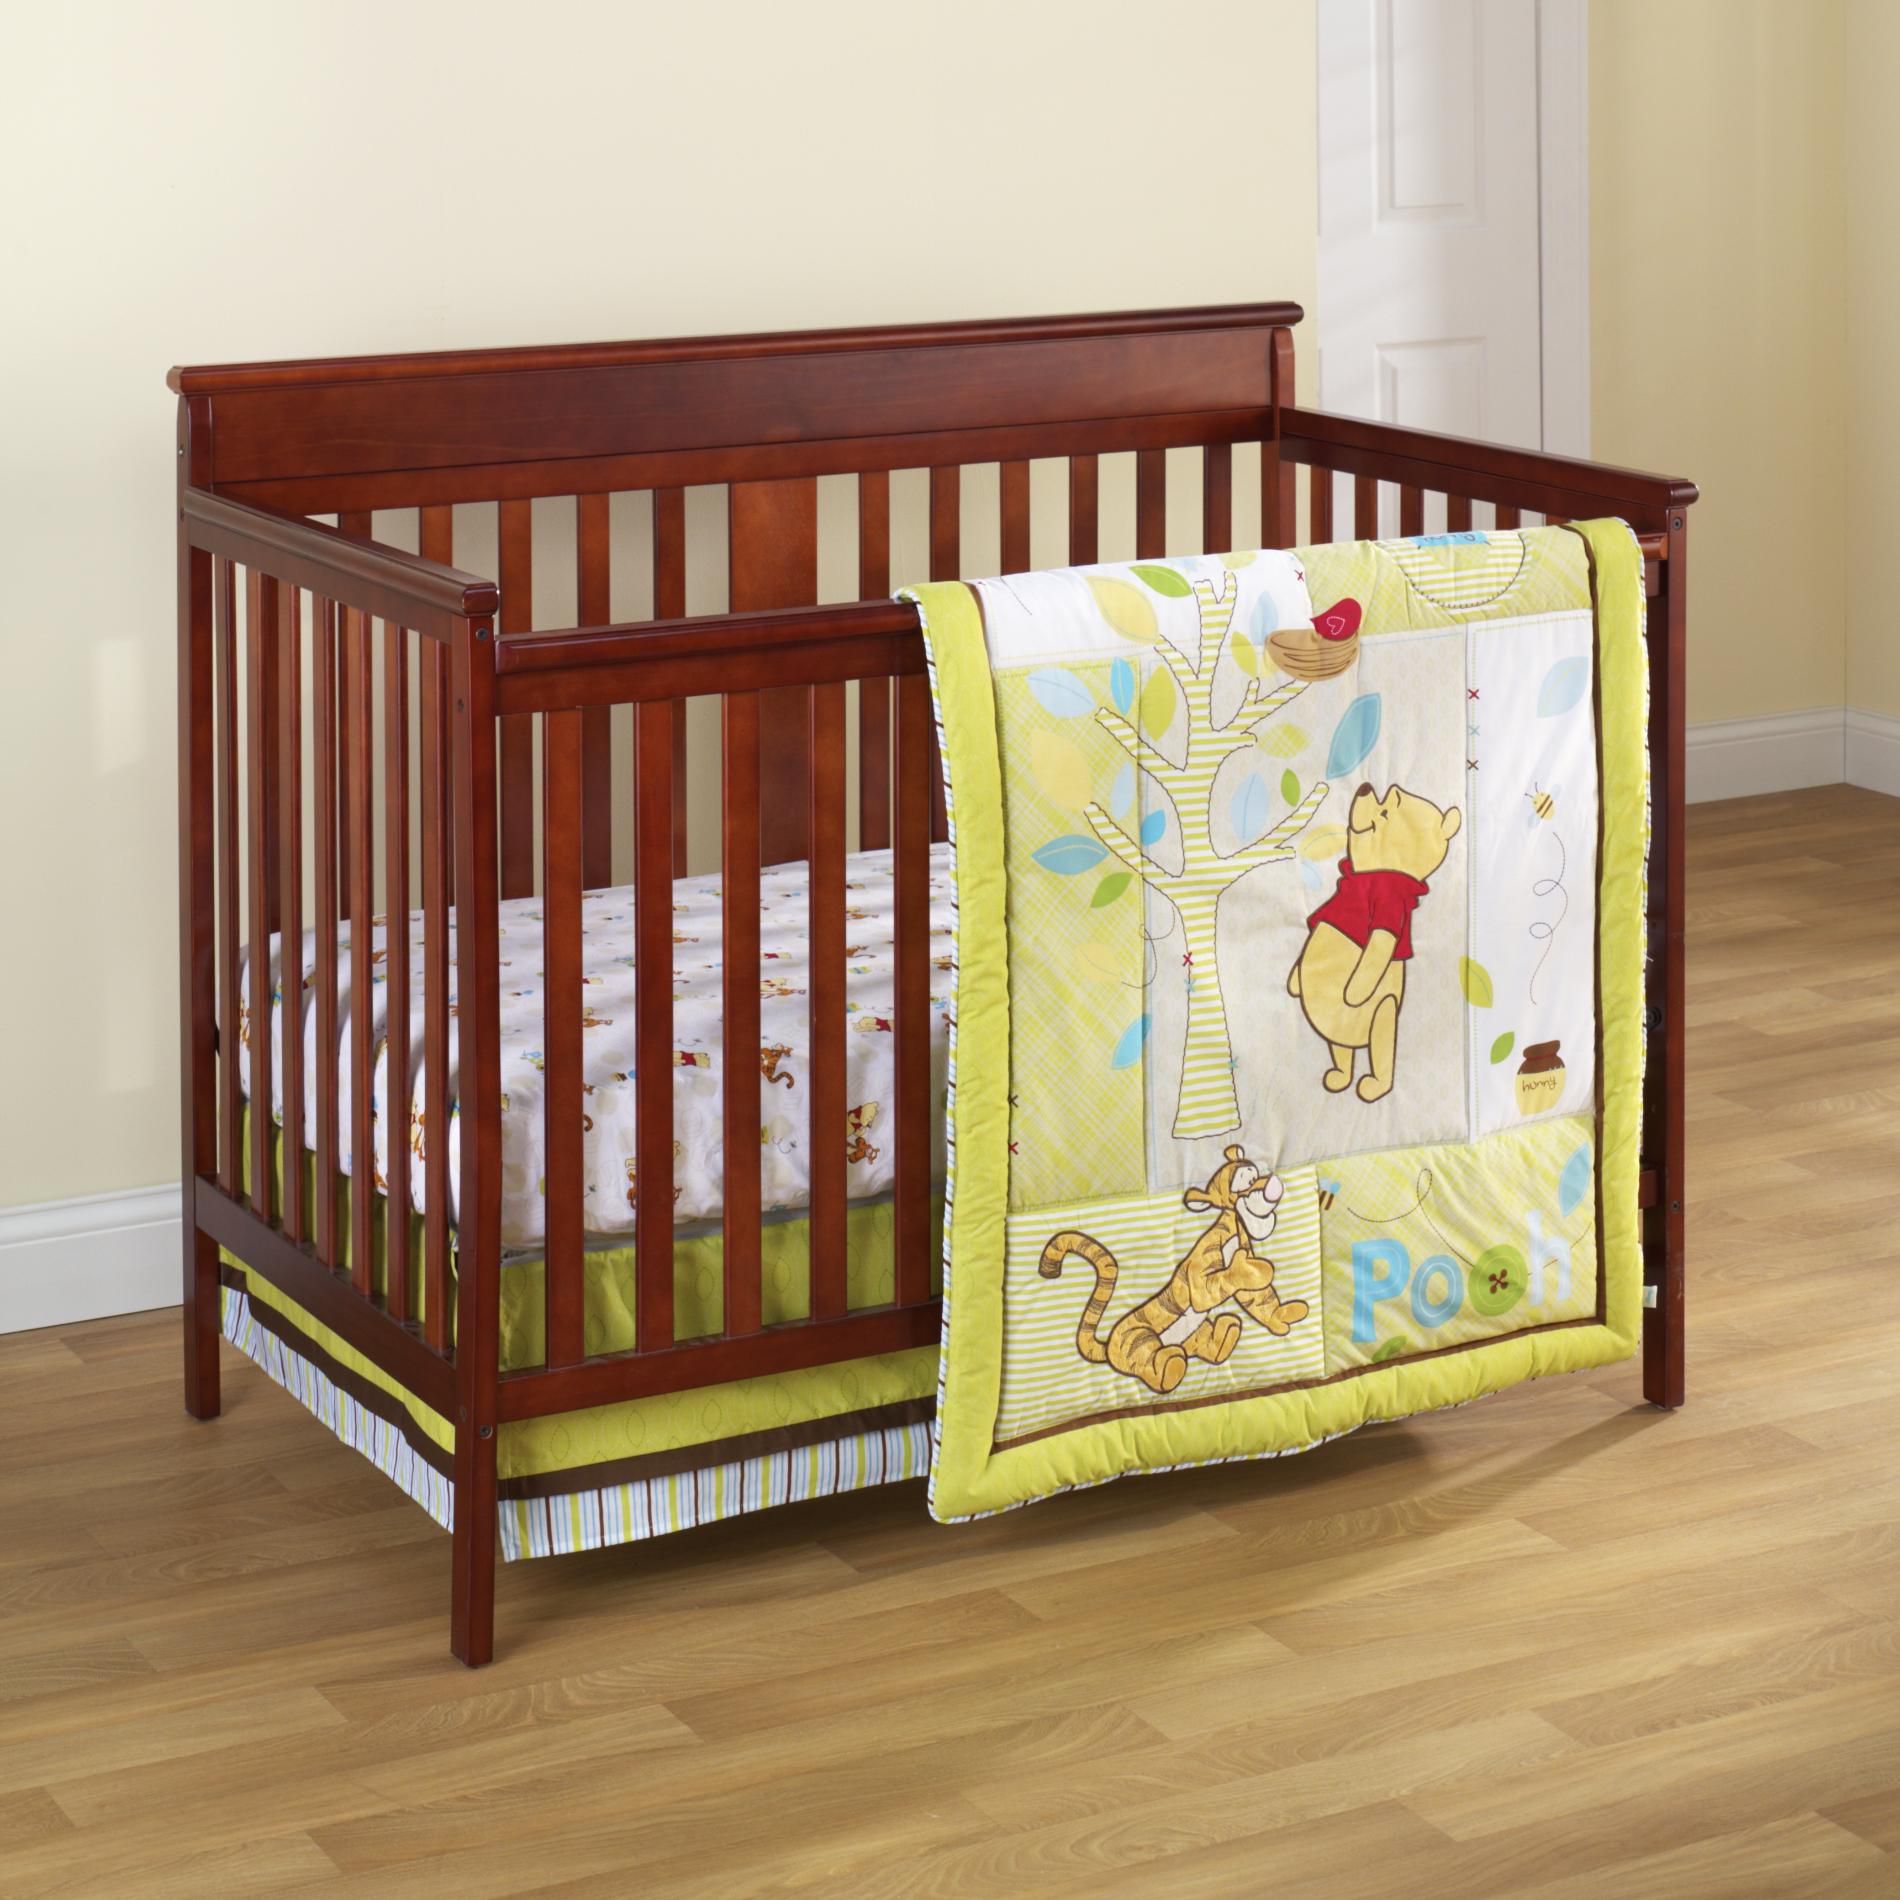 Winnie the Pooh 3 Piece Retro Pooh Crib Quilt Set Shop Your Way Online Shopping & Earn Points